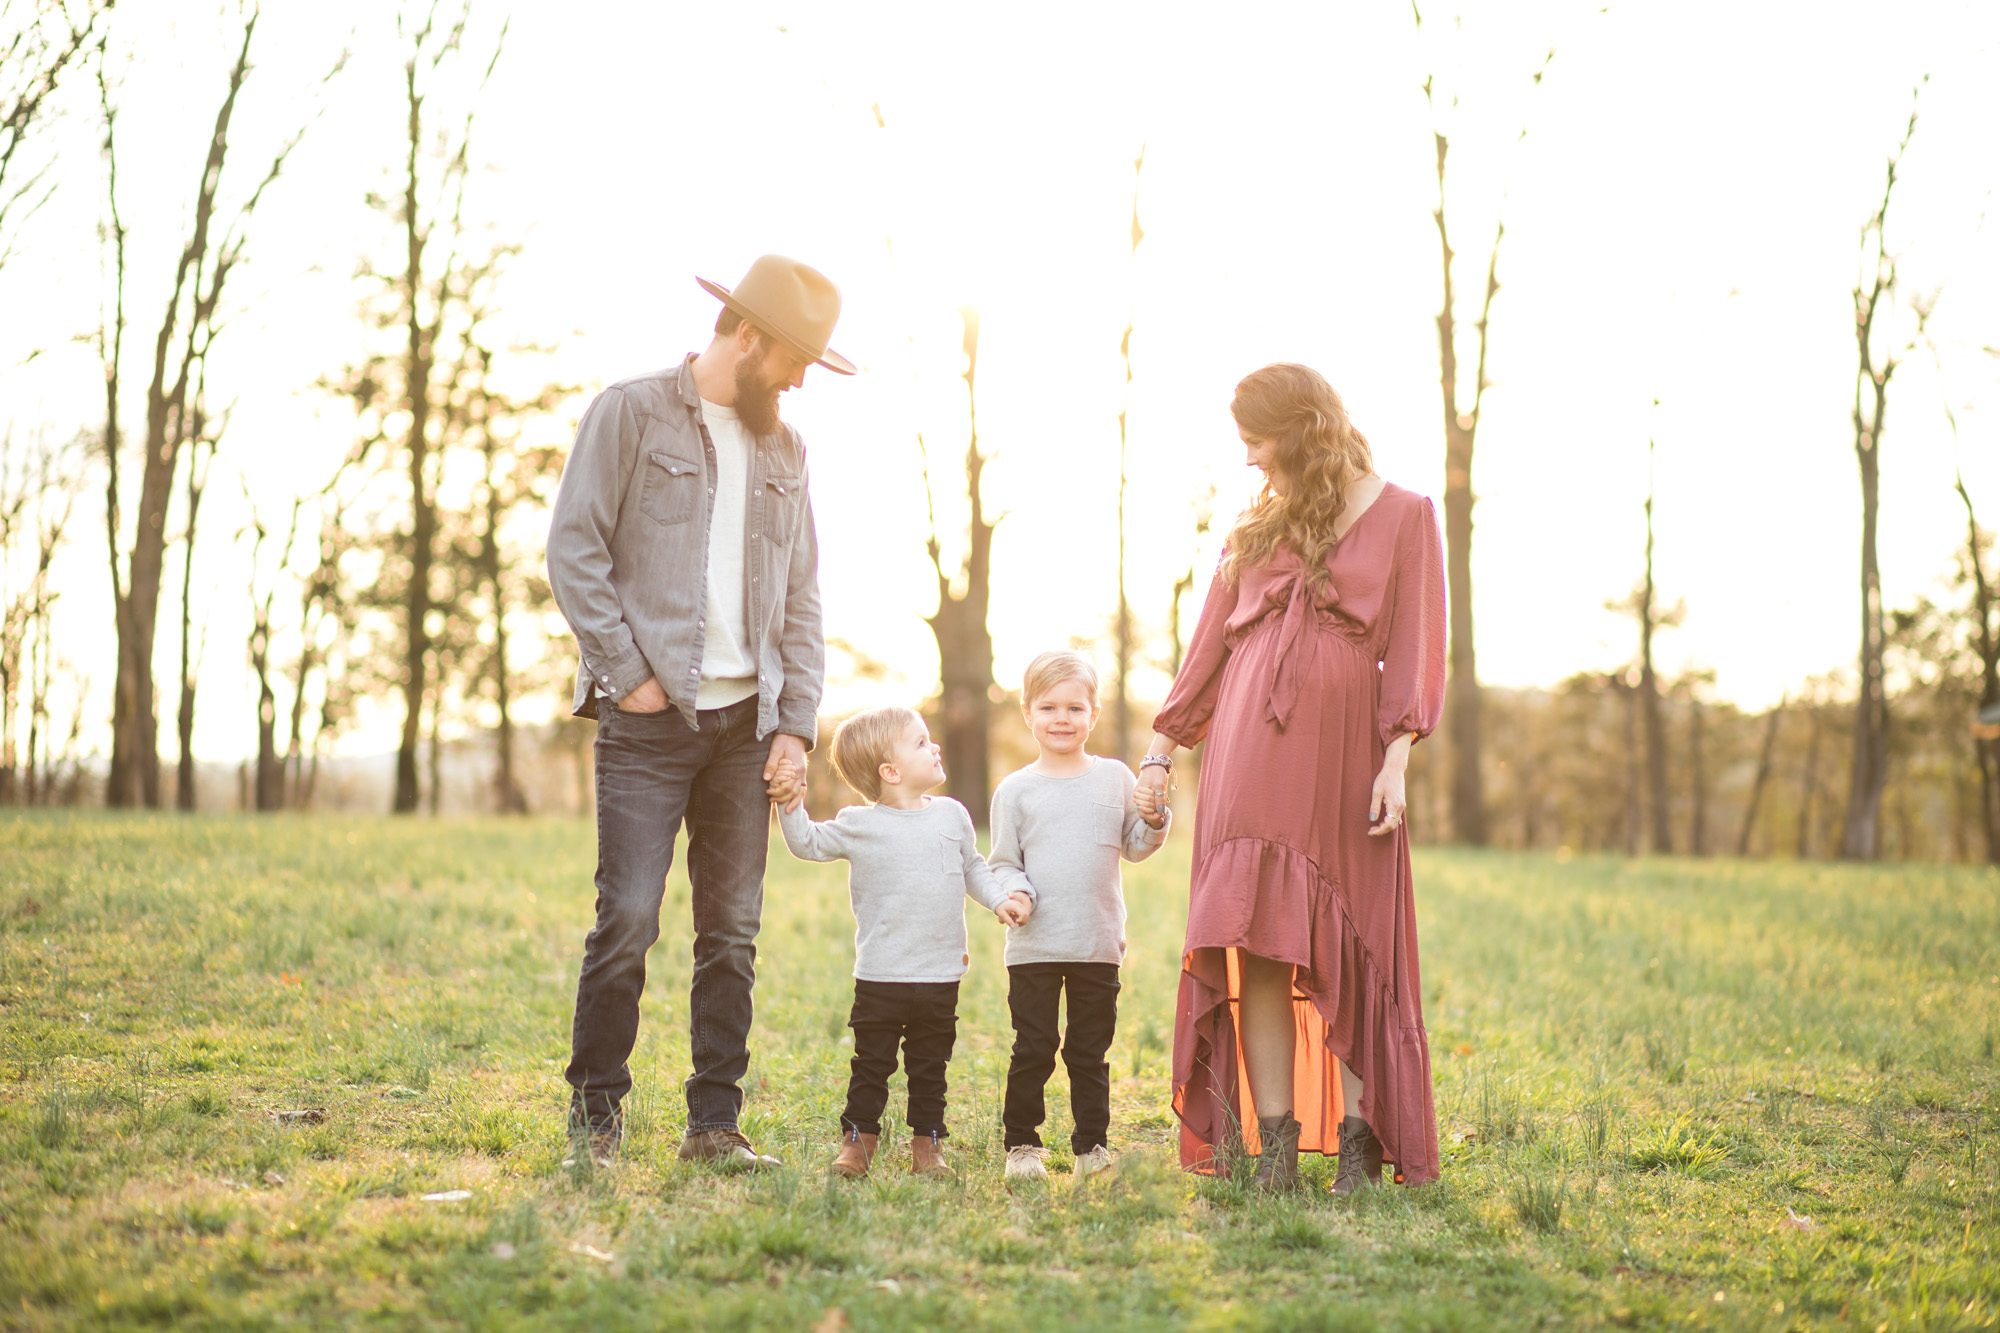 Hipster sunset family portrait maternity session in a field 